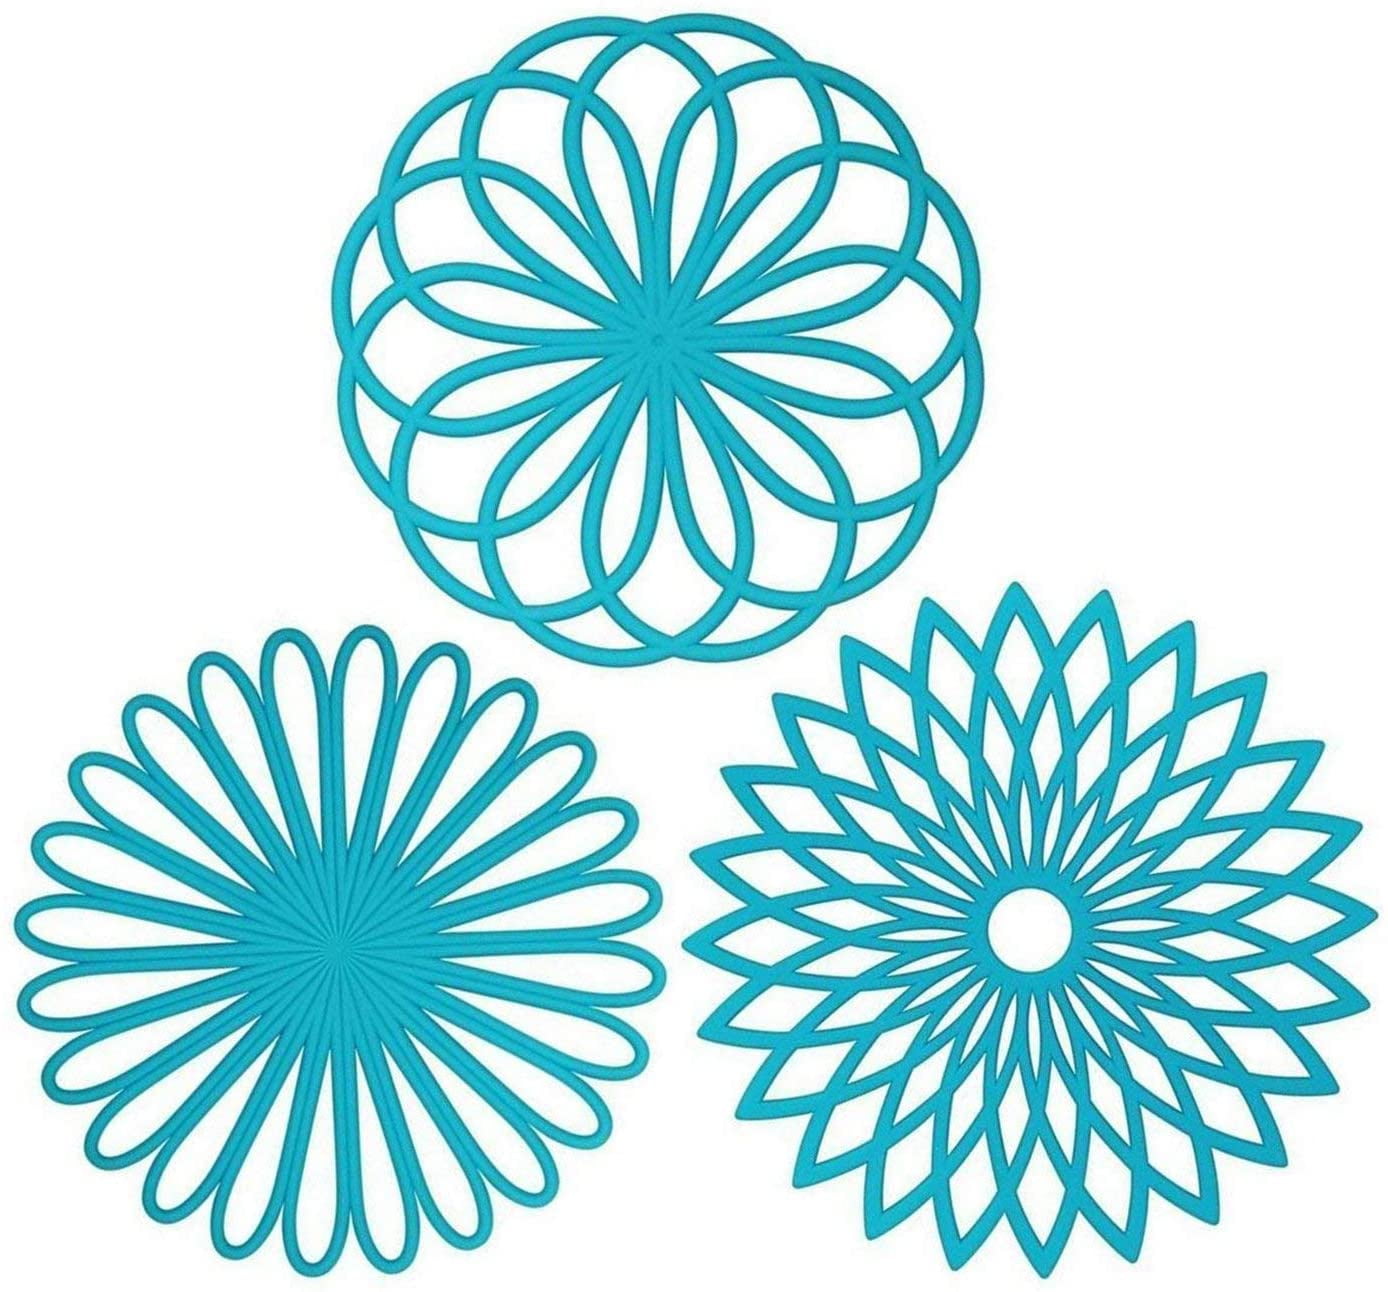 set of 3 Pack Light green Premium Quality Insulated Flexible Durable Non Slip Hot Pads and Coasters Cup Silicone Multi-Use Flower Trivet Mat